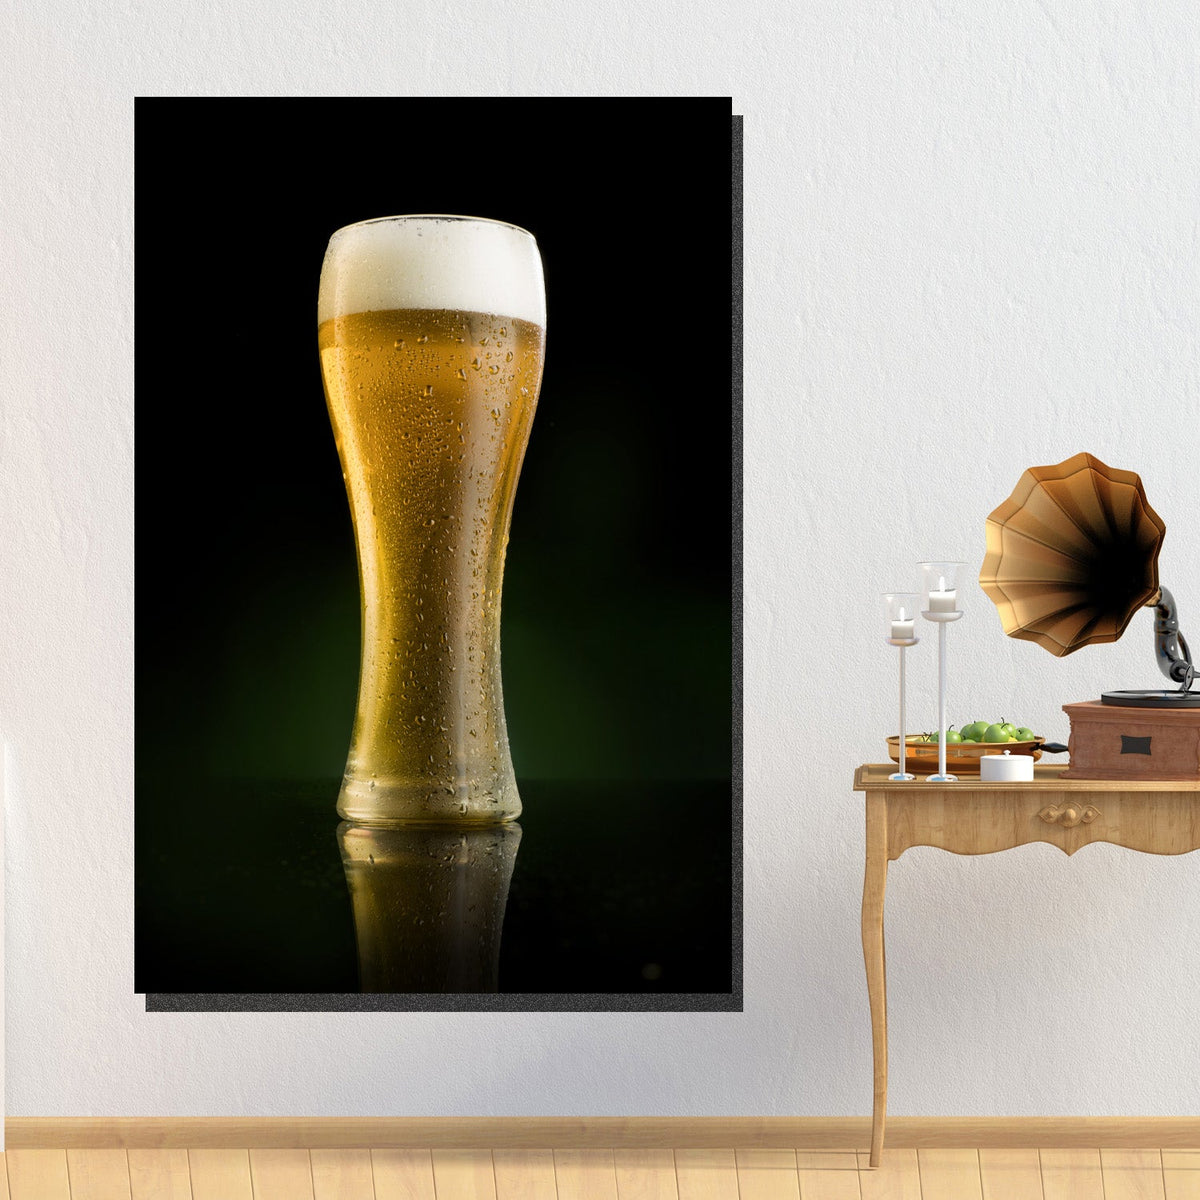 https://cdn.shopify.com/s/files/1/0387/9986/8044/products/FrostedGlassofBeerCanvasArtprintStretched-2.jpg